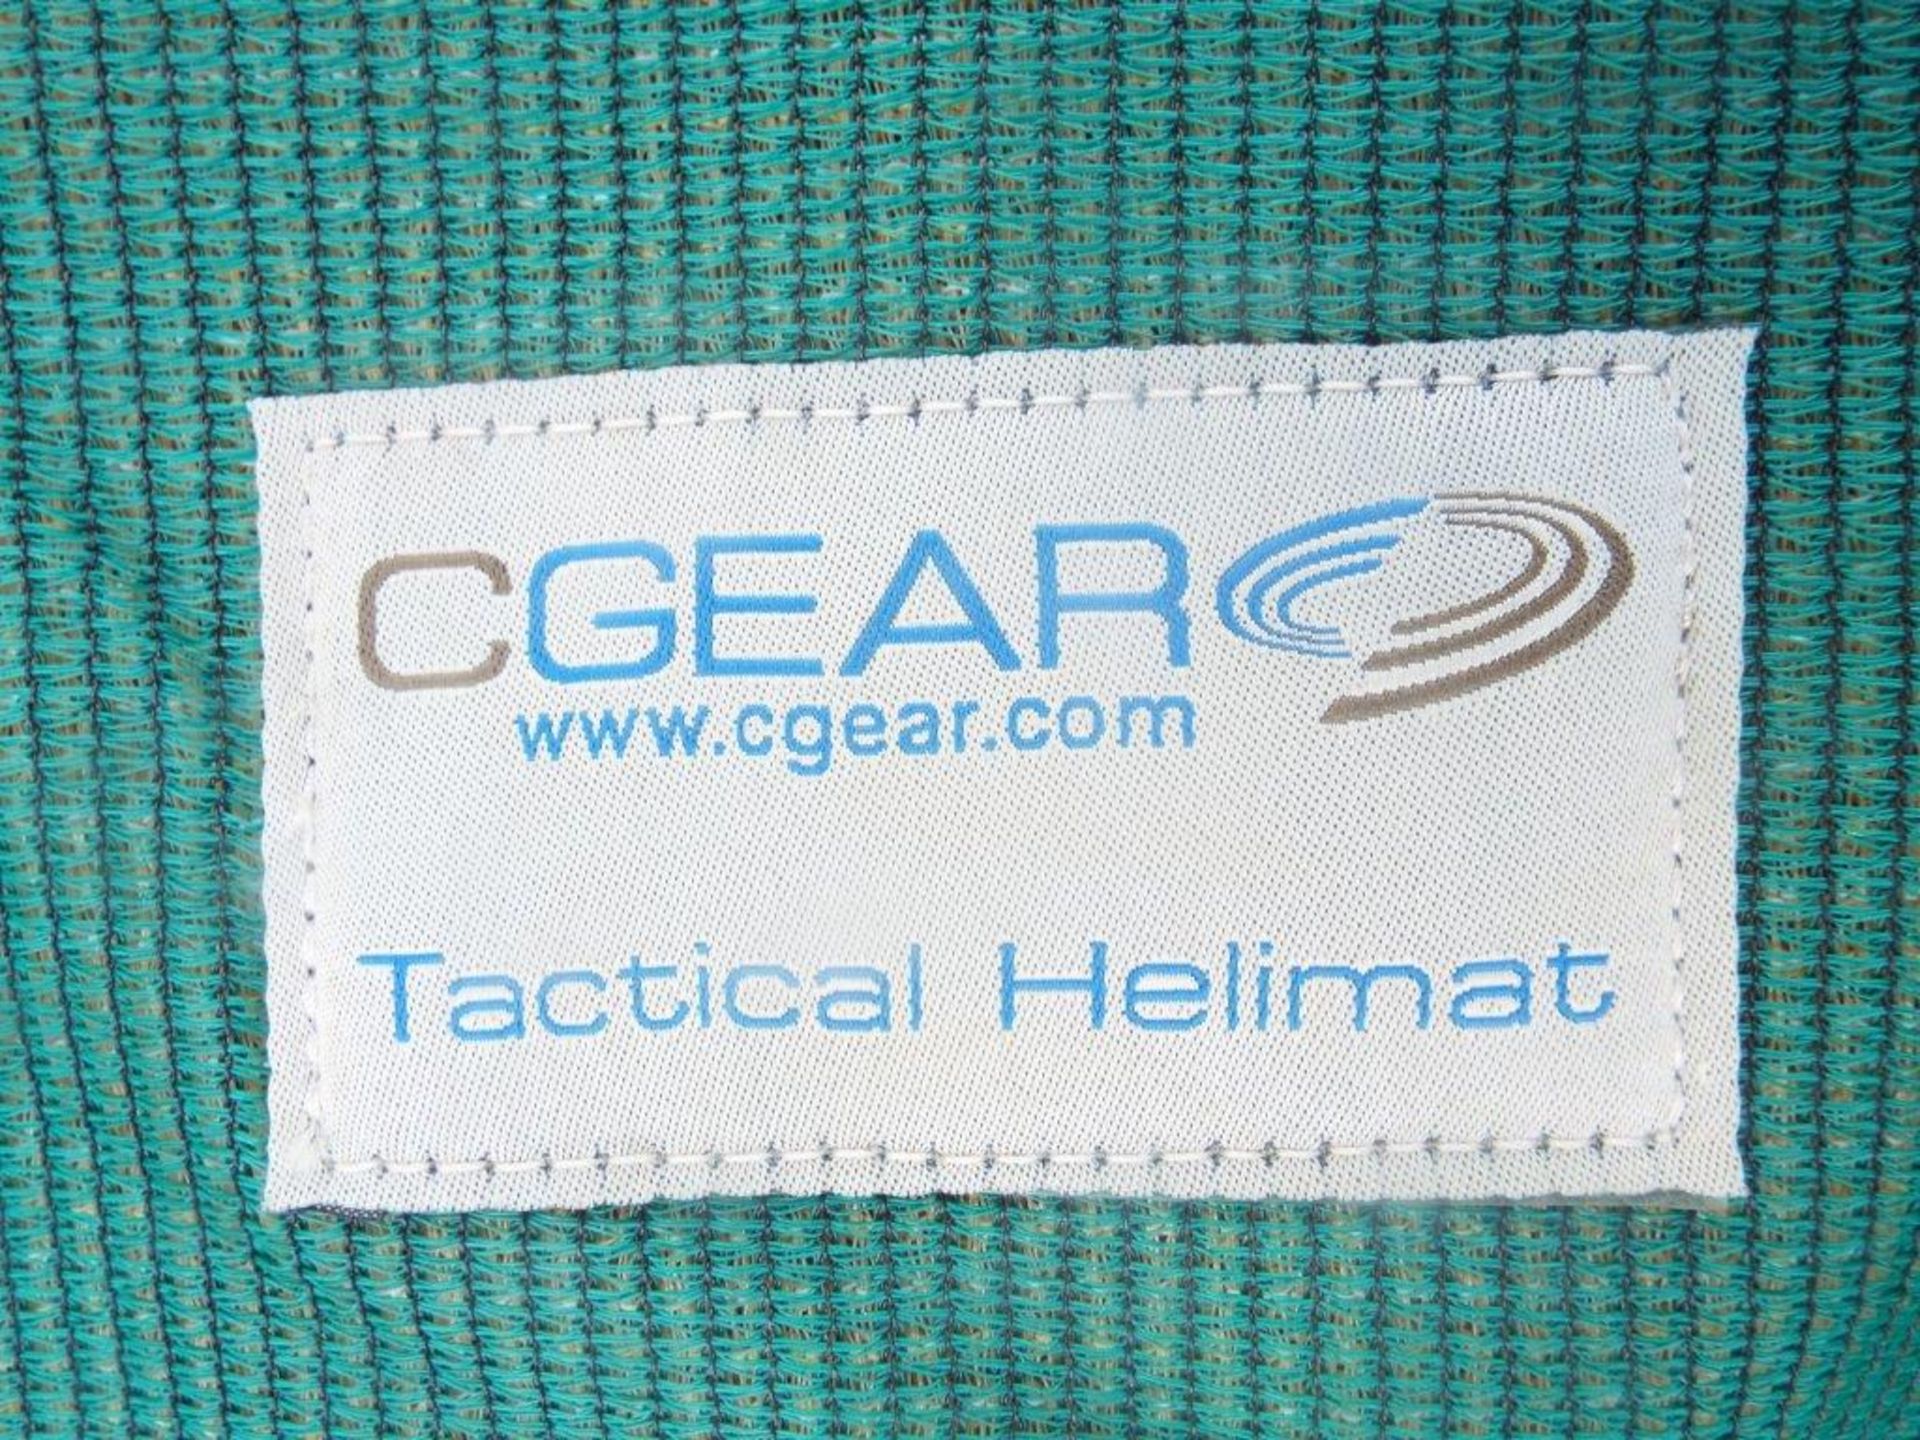 CGear Tactical Helimat 6m x 6m - Image 4 of 6